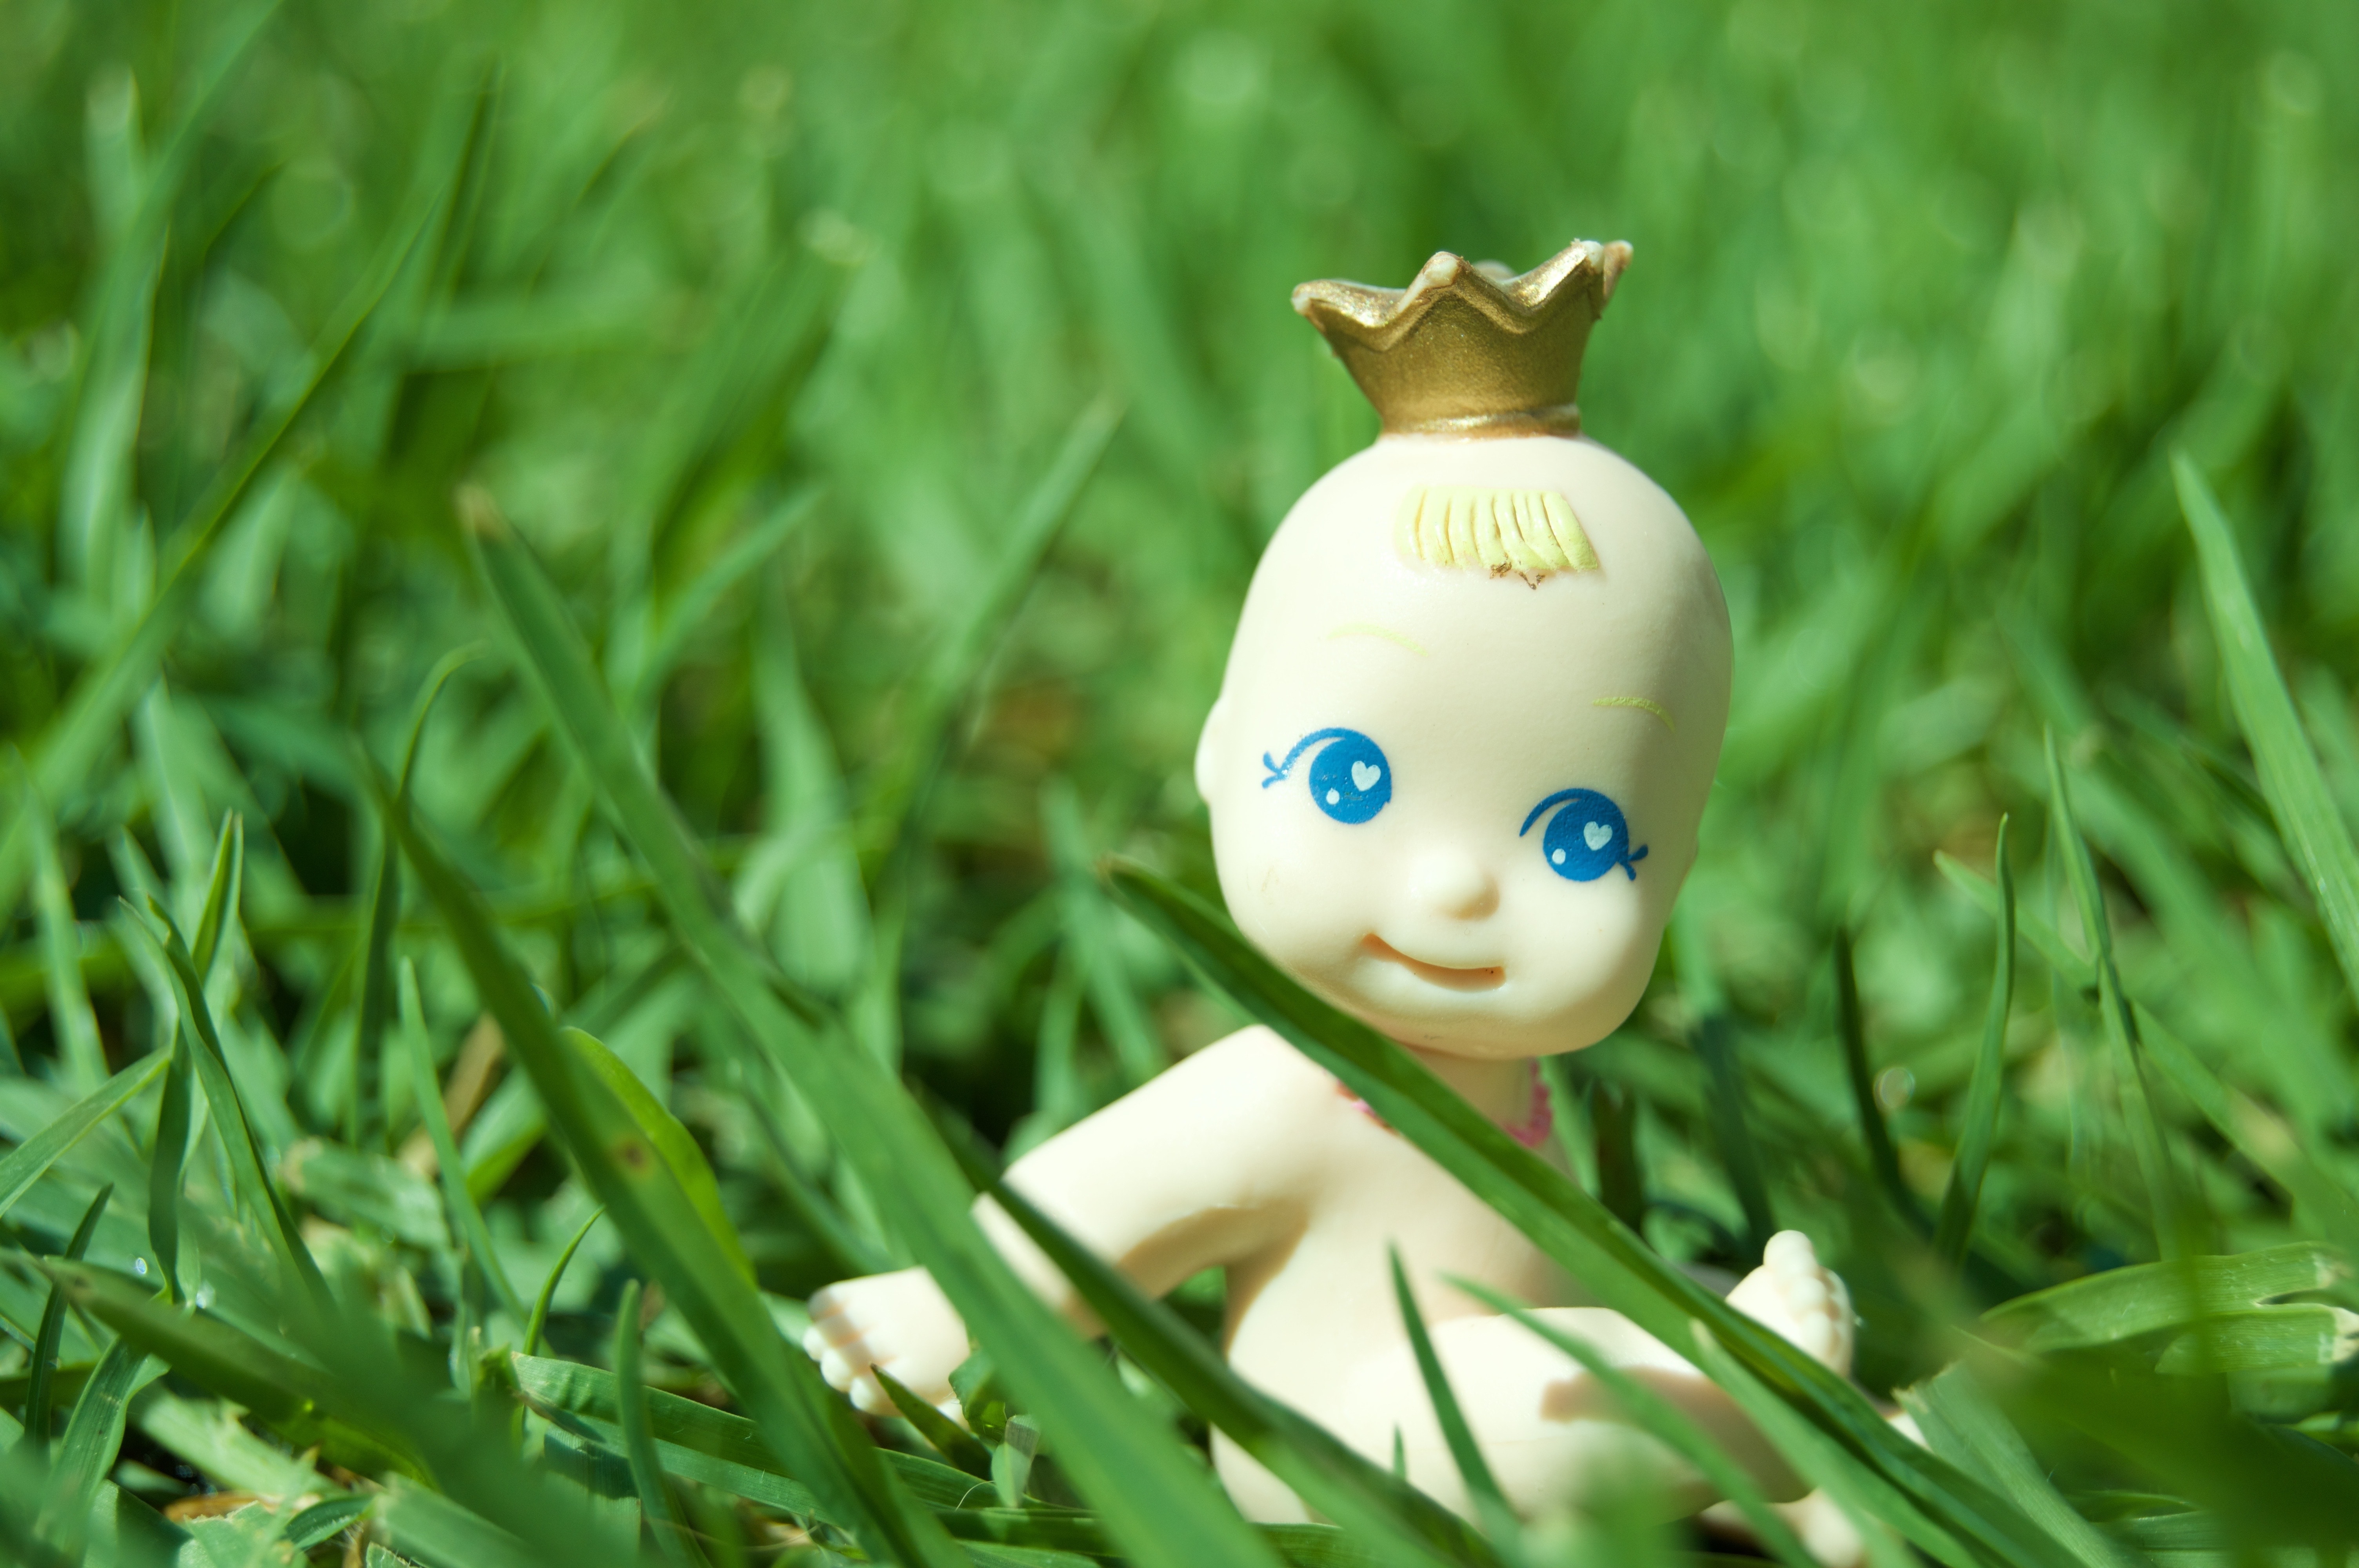 white baby toy on green grass during daytime